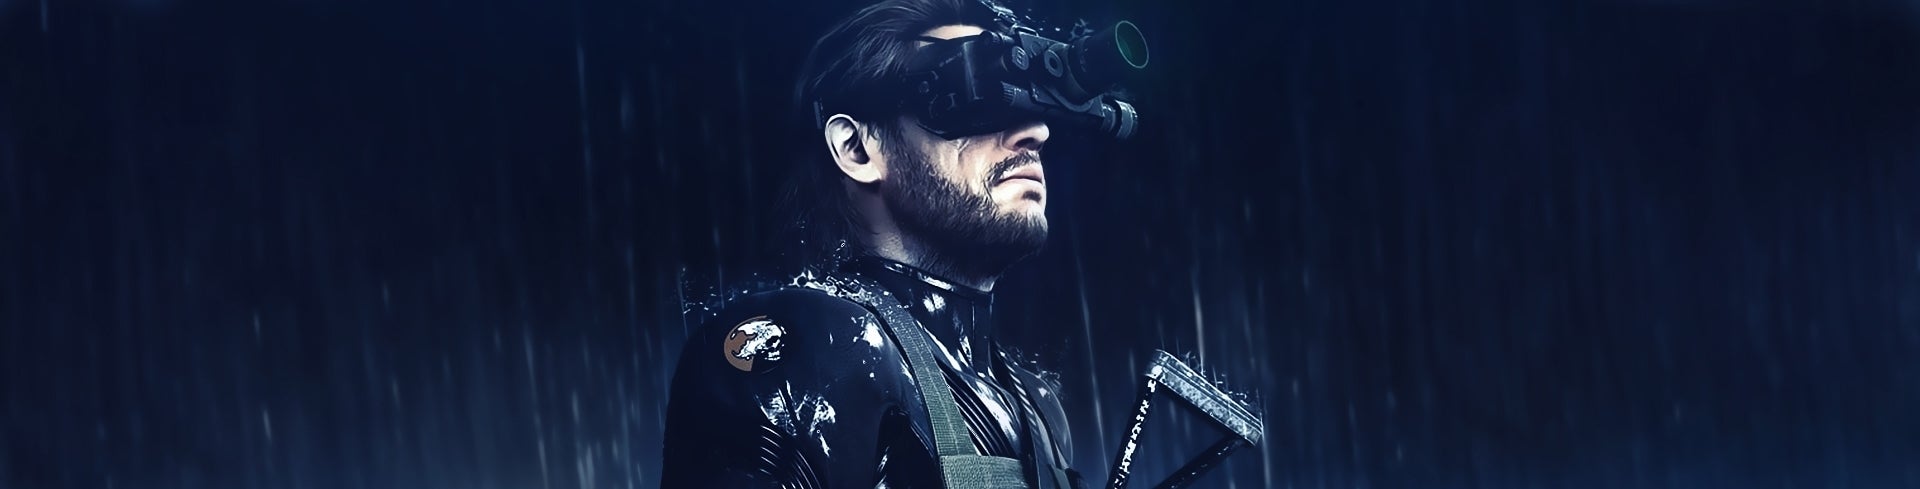 Image for Metal Gear Solid 5: Ground Zeroes review